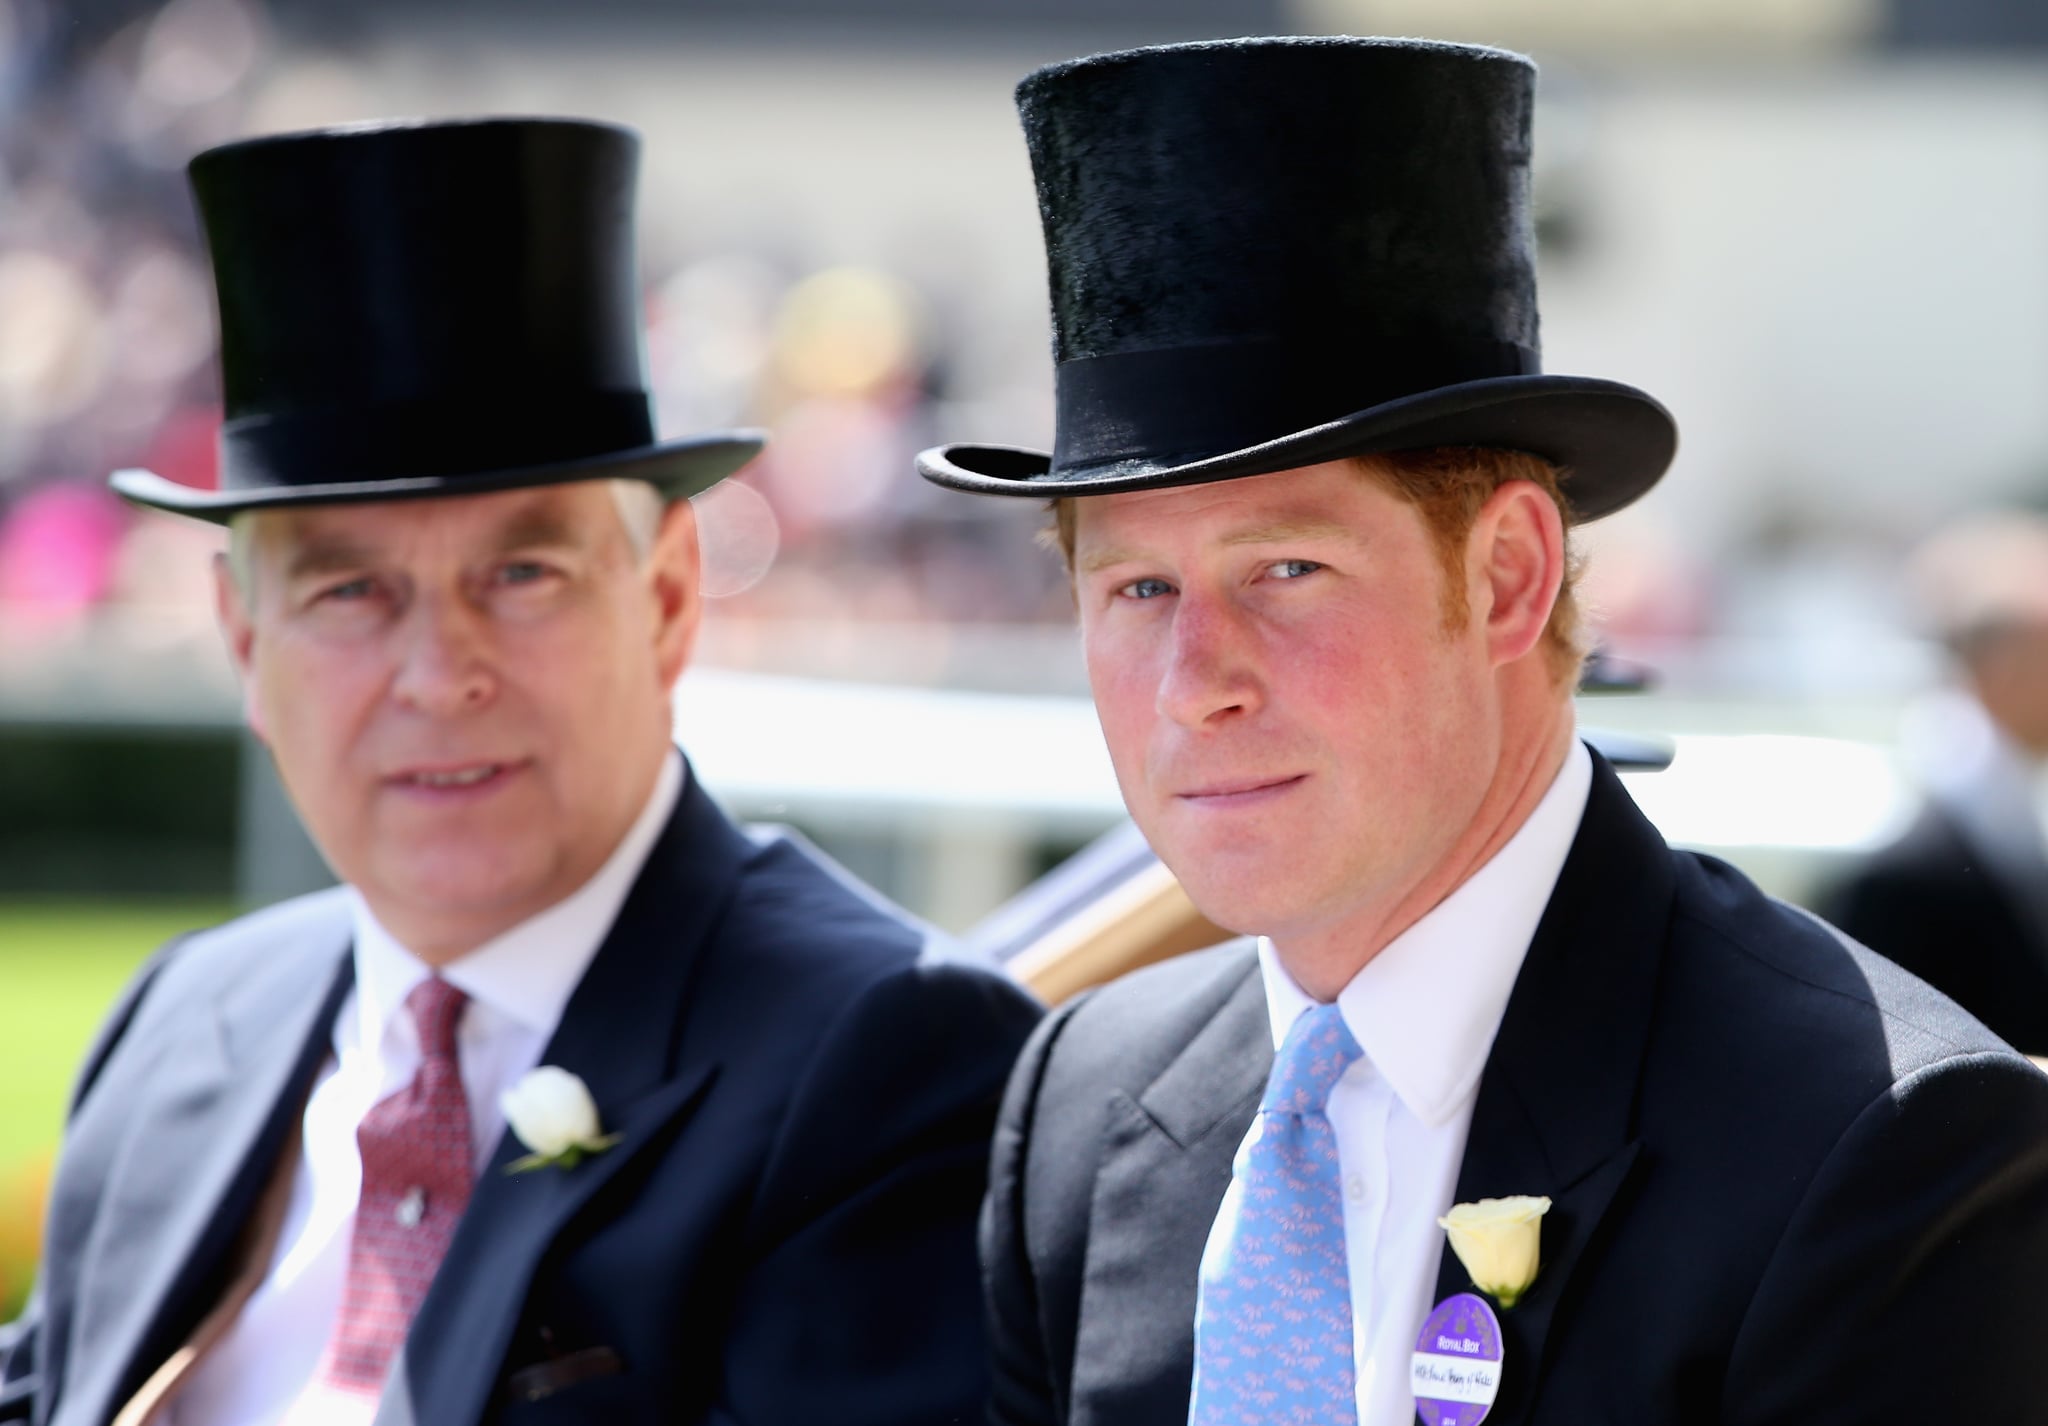 ASCOT, ENGLAND - JUNE 17:  (L-R) Prince Andrew, Duke of York and Prince Harry attend day one of Royal Ascot at Ascot Racecourse on June 17, 2014 in Ascot, England.  (Photo by Chris Jackson/Getty Images for Ascot Racecourse)